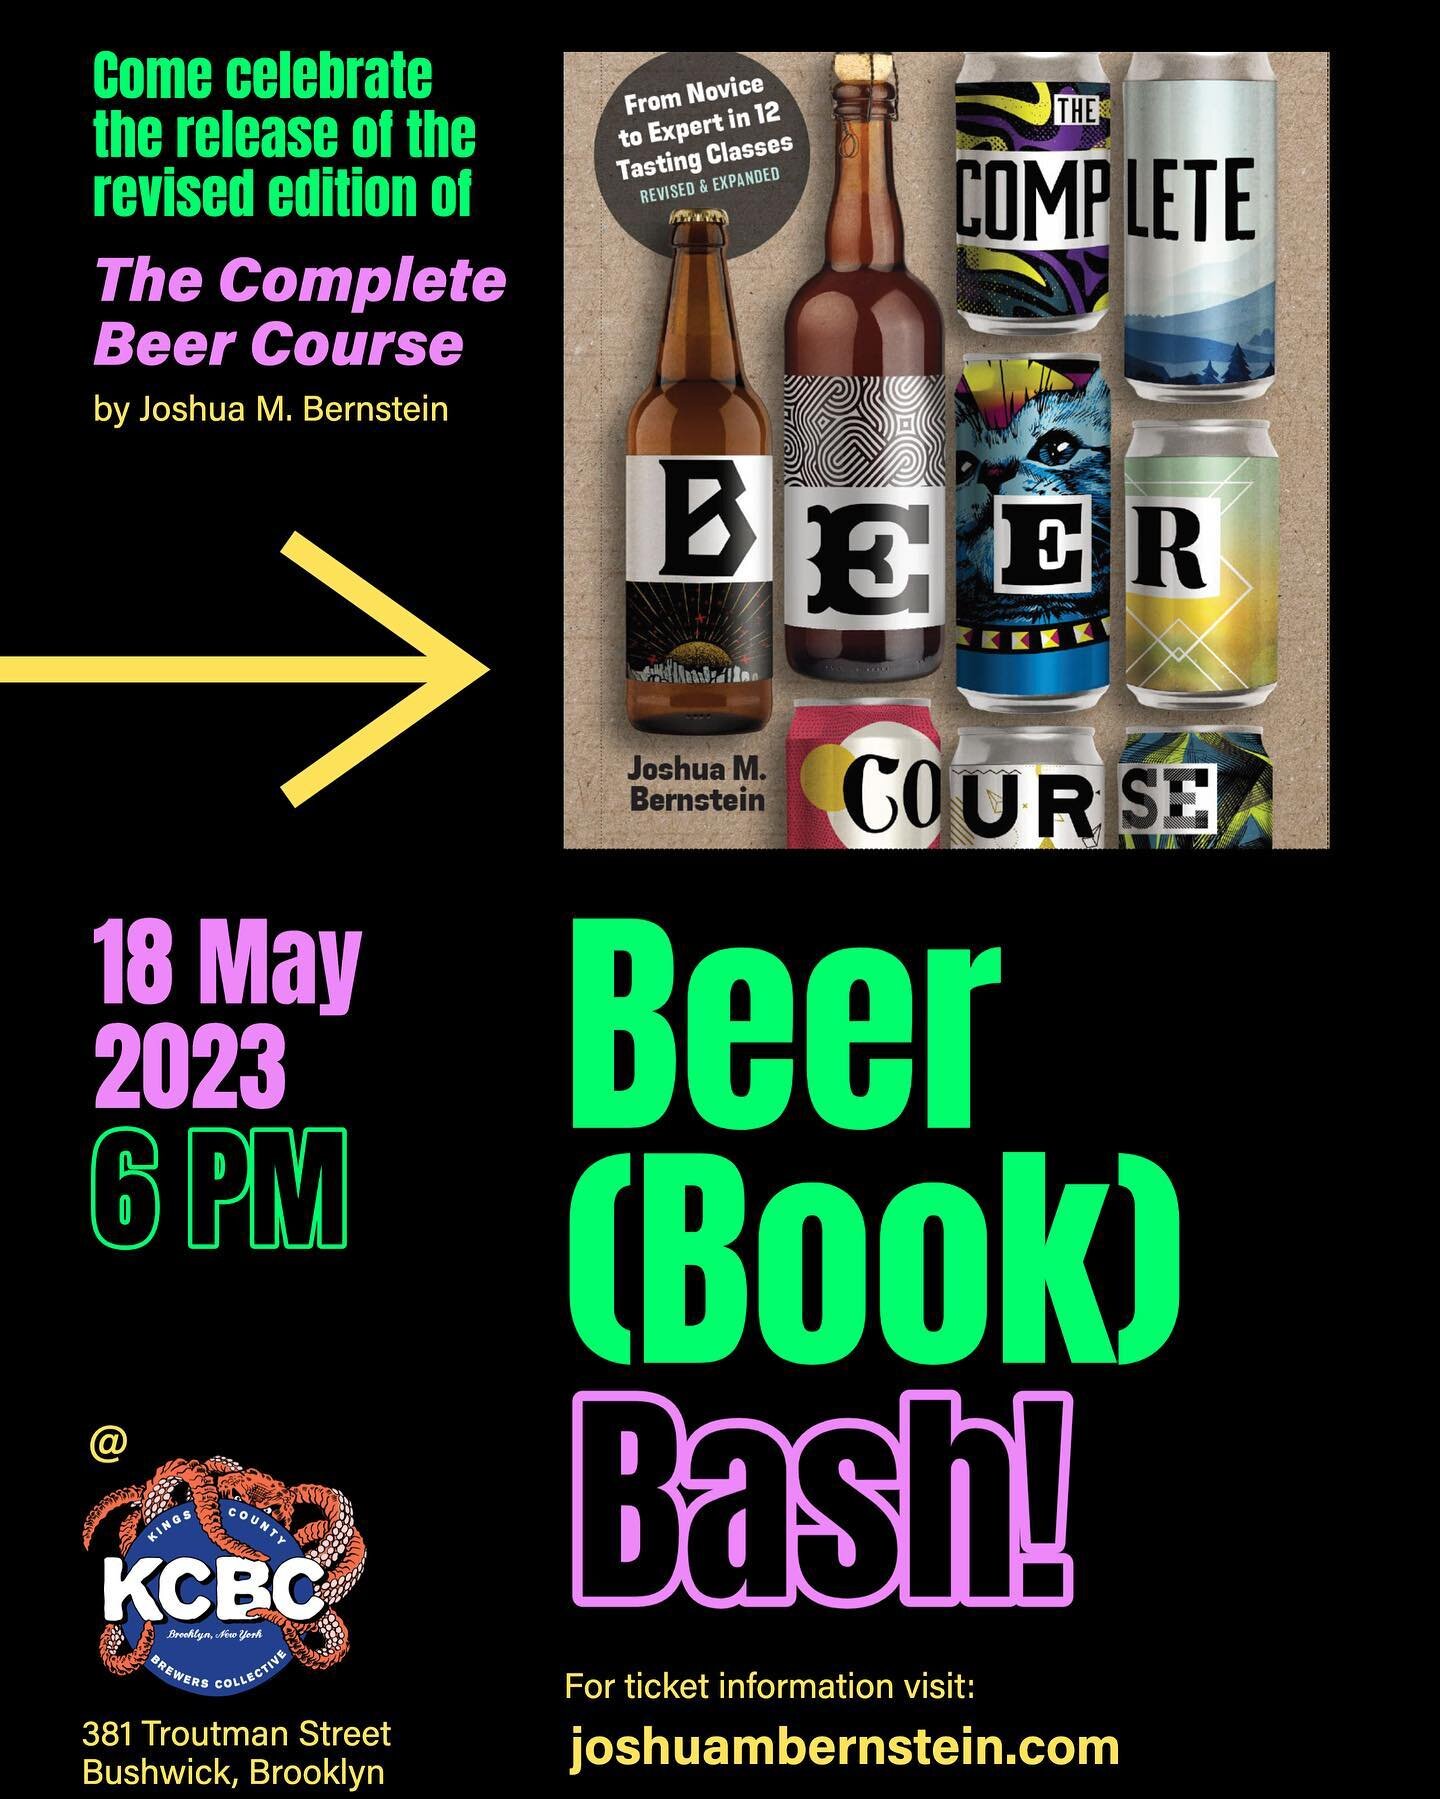 Hey beer folks! Good friend of the Brewmies @joshmbernstein is hosting a launch party for the release of the revised version of his book &ldquo;The Complete Beer Course&rdquo; next month at @kcbcbeer on Thursday, May 18th from 6-9 PM.
&bull;
There ar